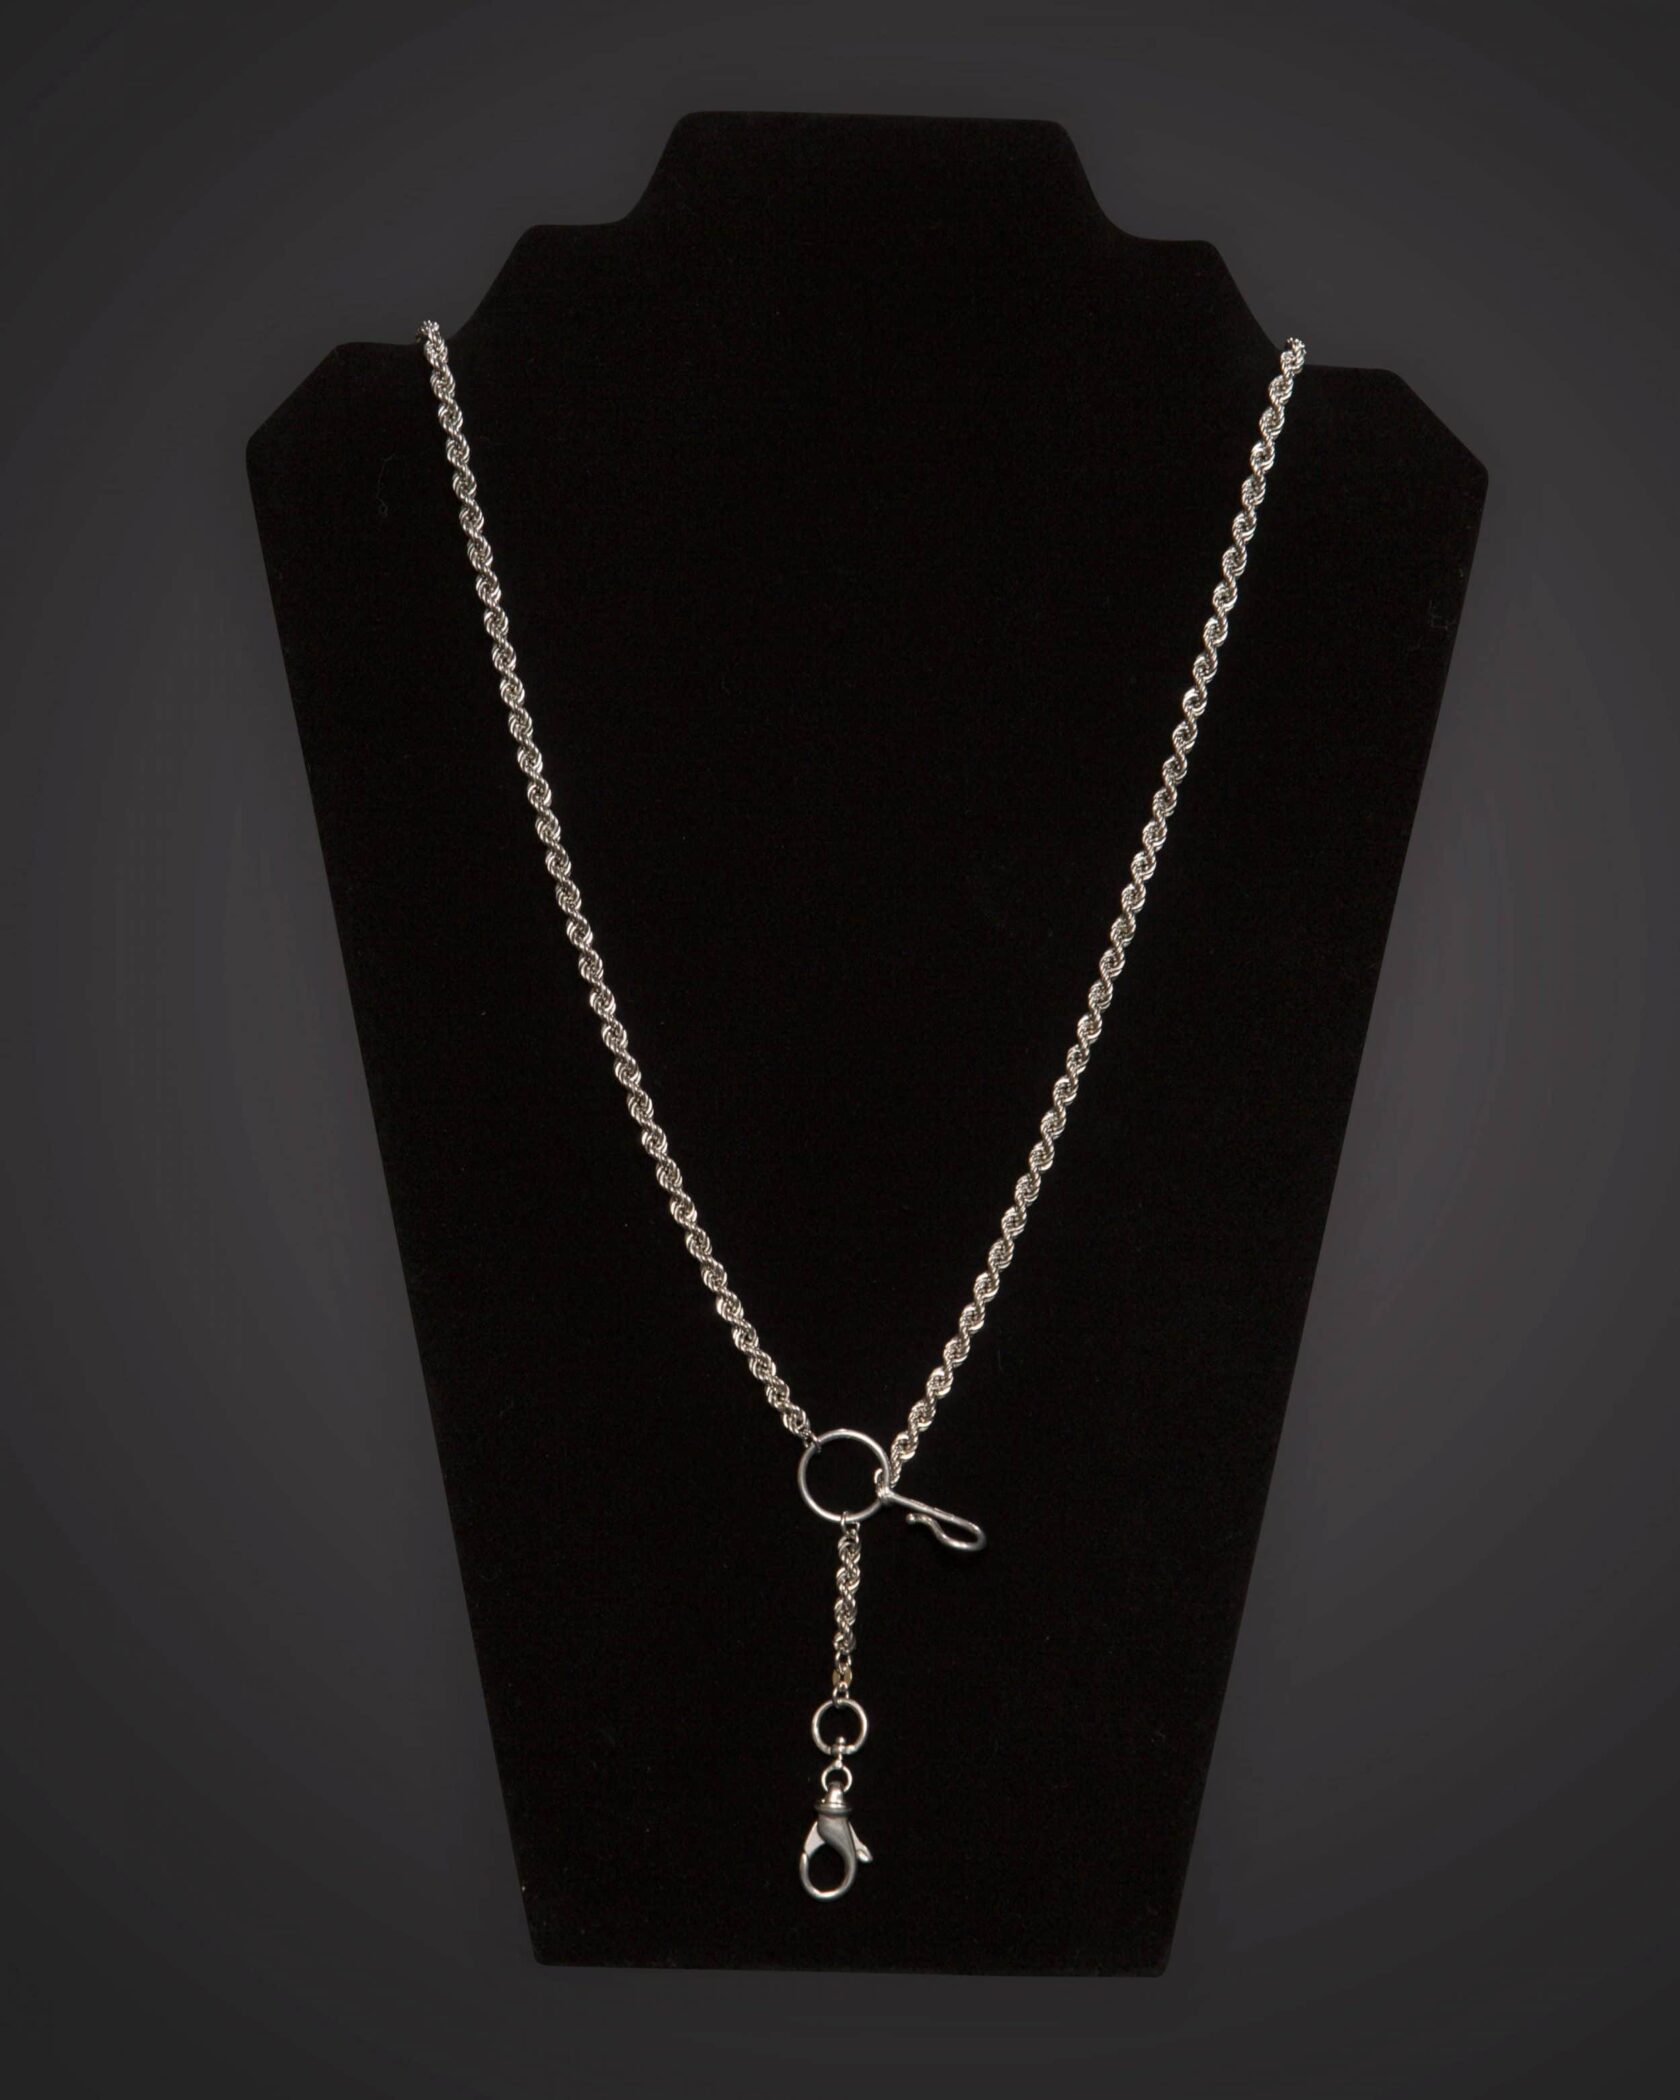 Pectoral Chain - Braided - Long - Silver Plated